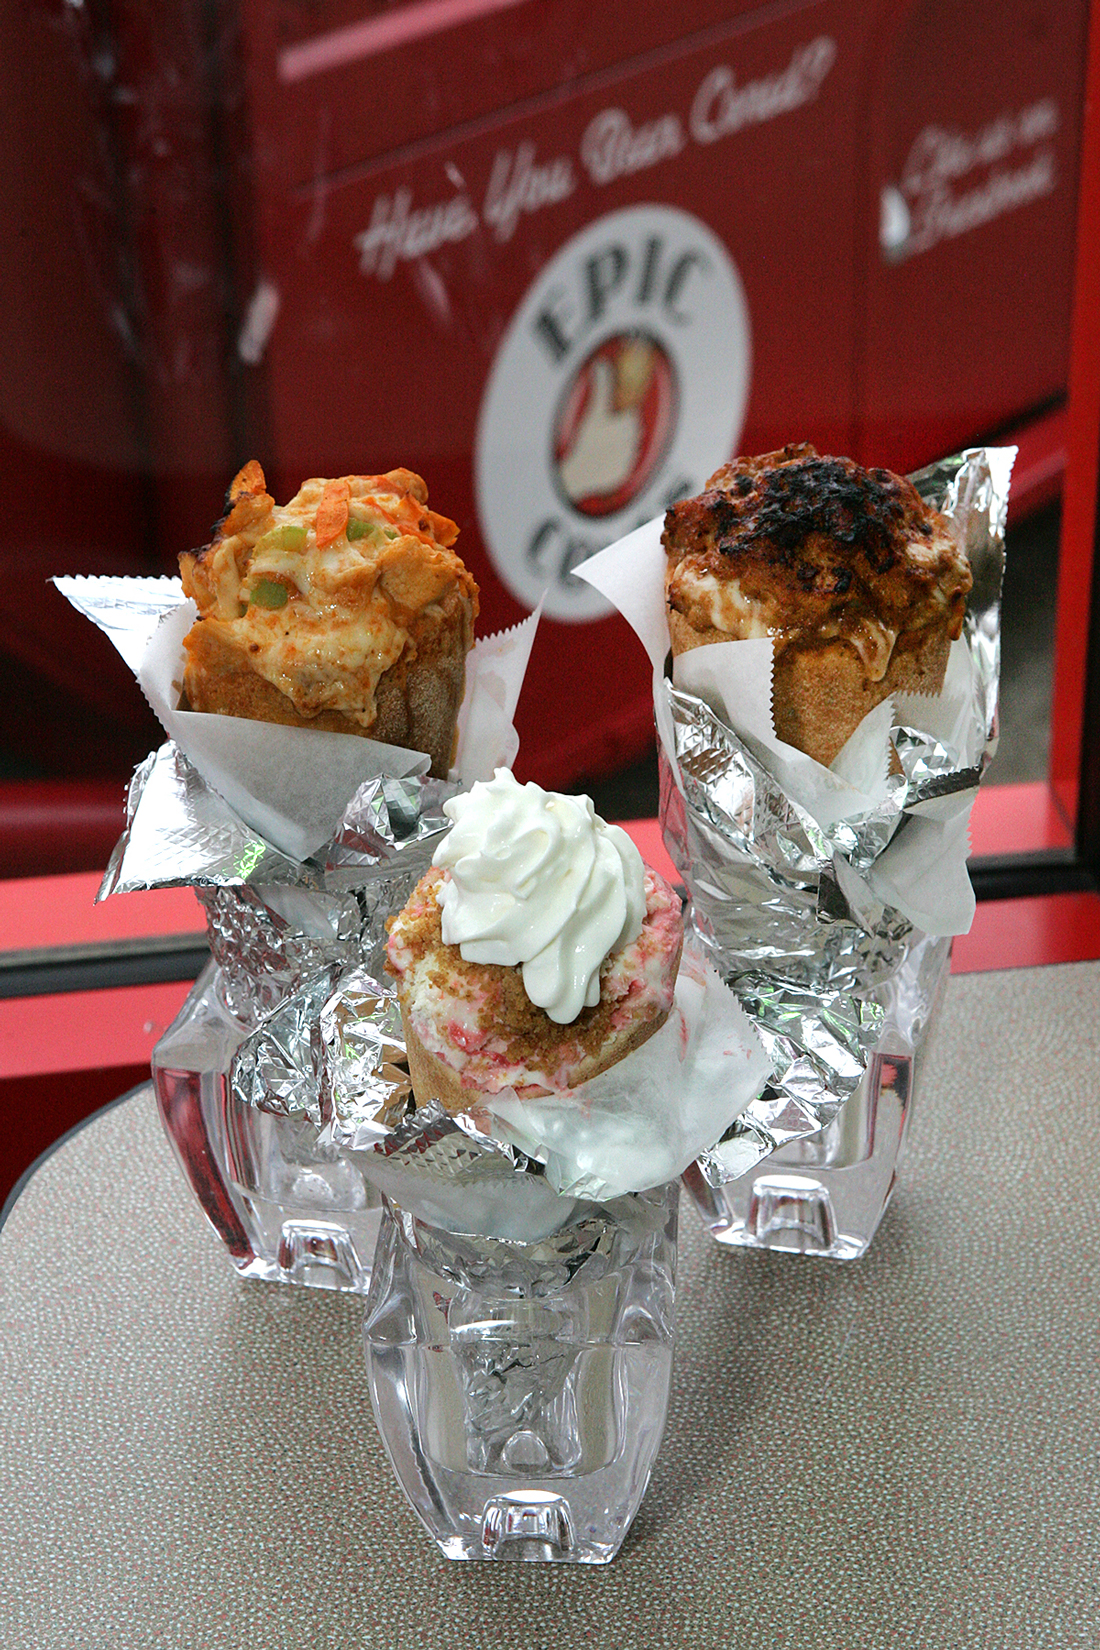 Strawberry cheesecake in a cone (center) isn’t all that surprising, but buffalo chicken (left) and pulled pork make a major statement at Epic Cones. Lee Chastain